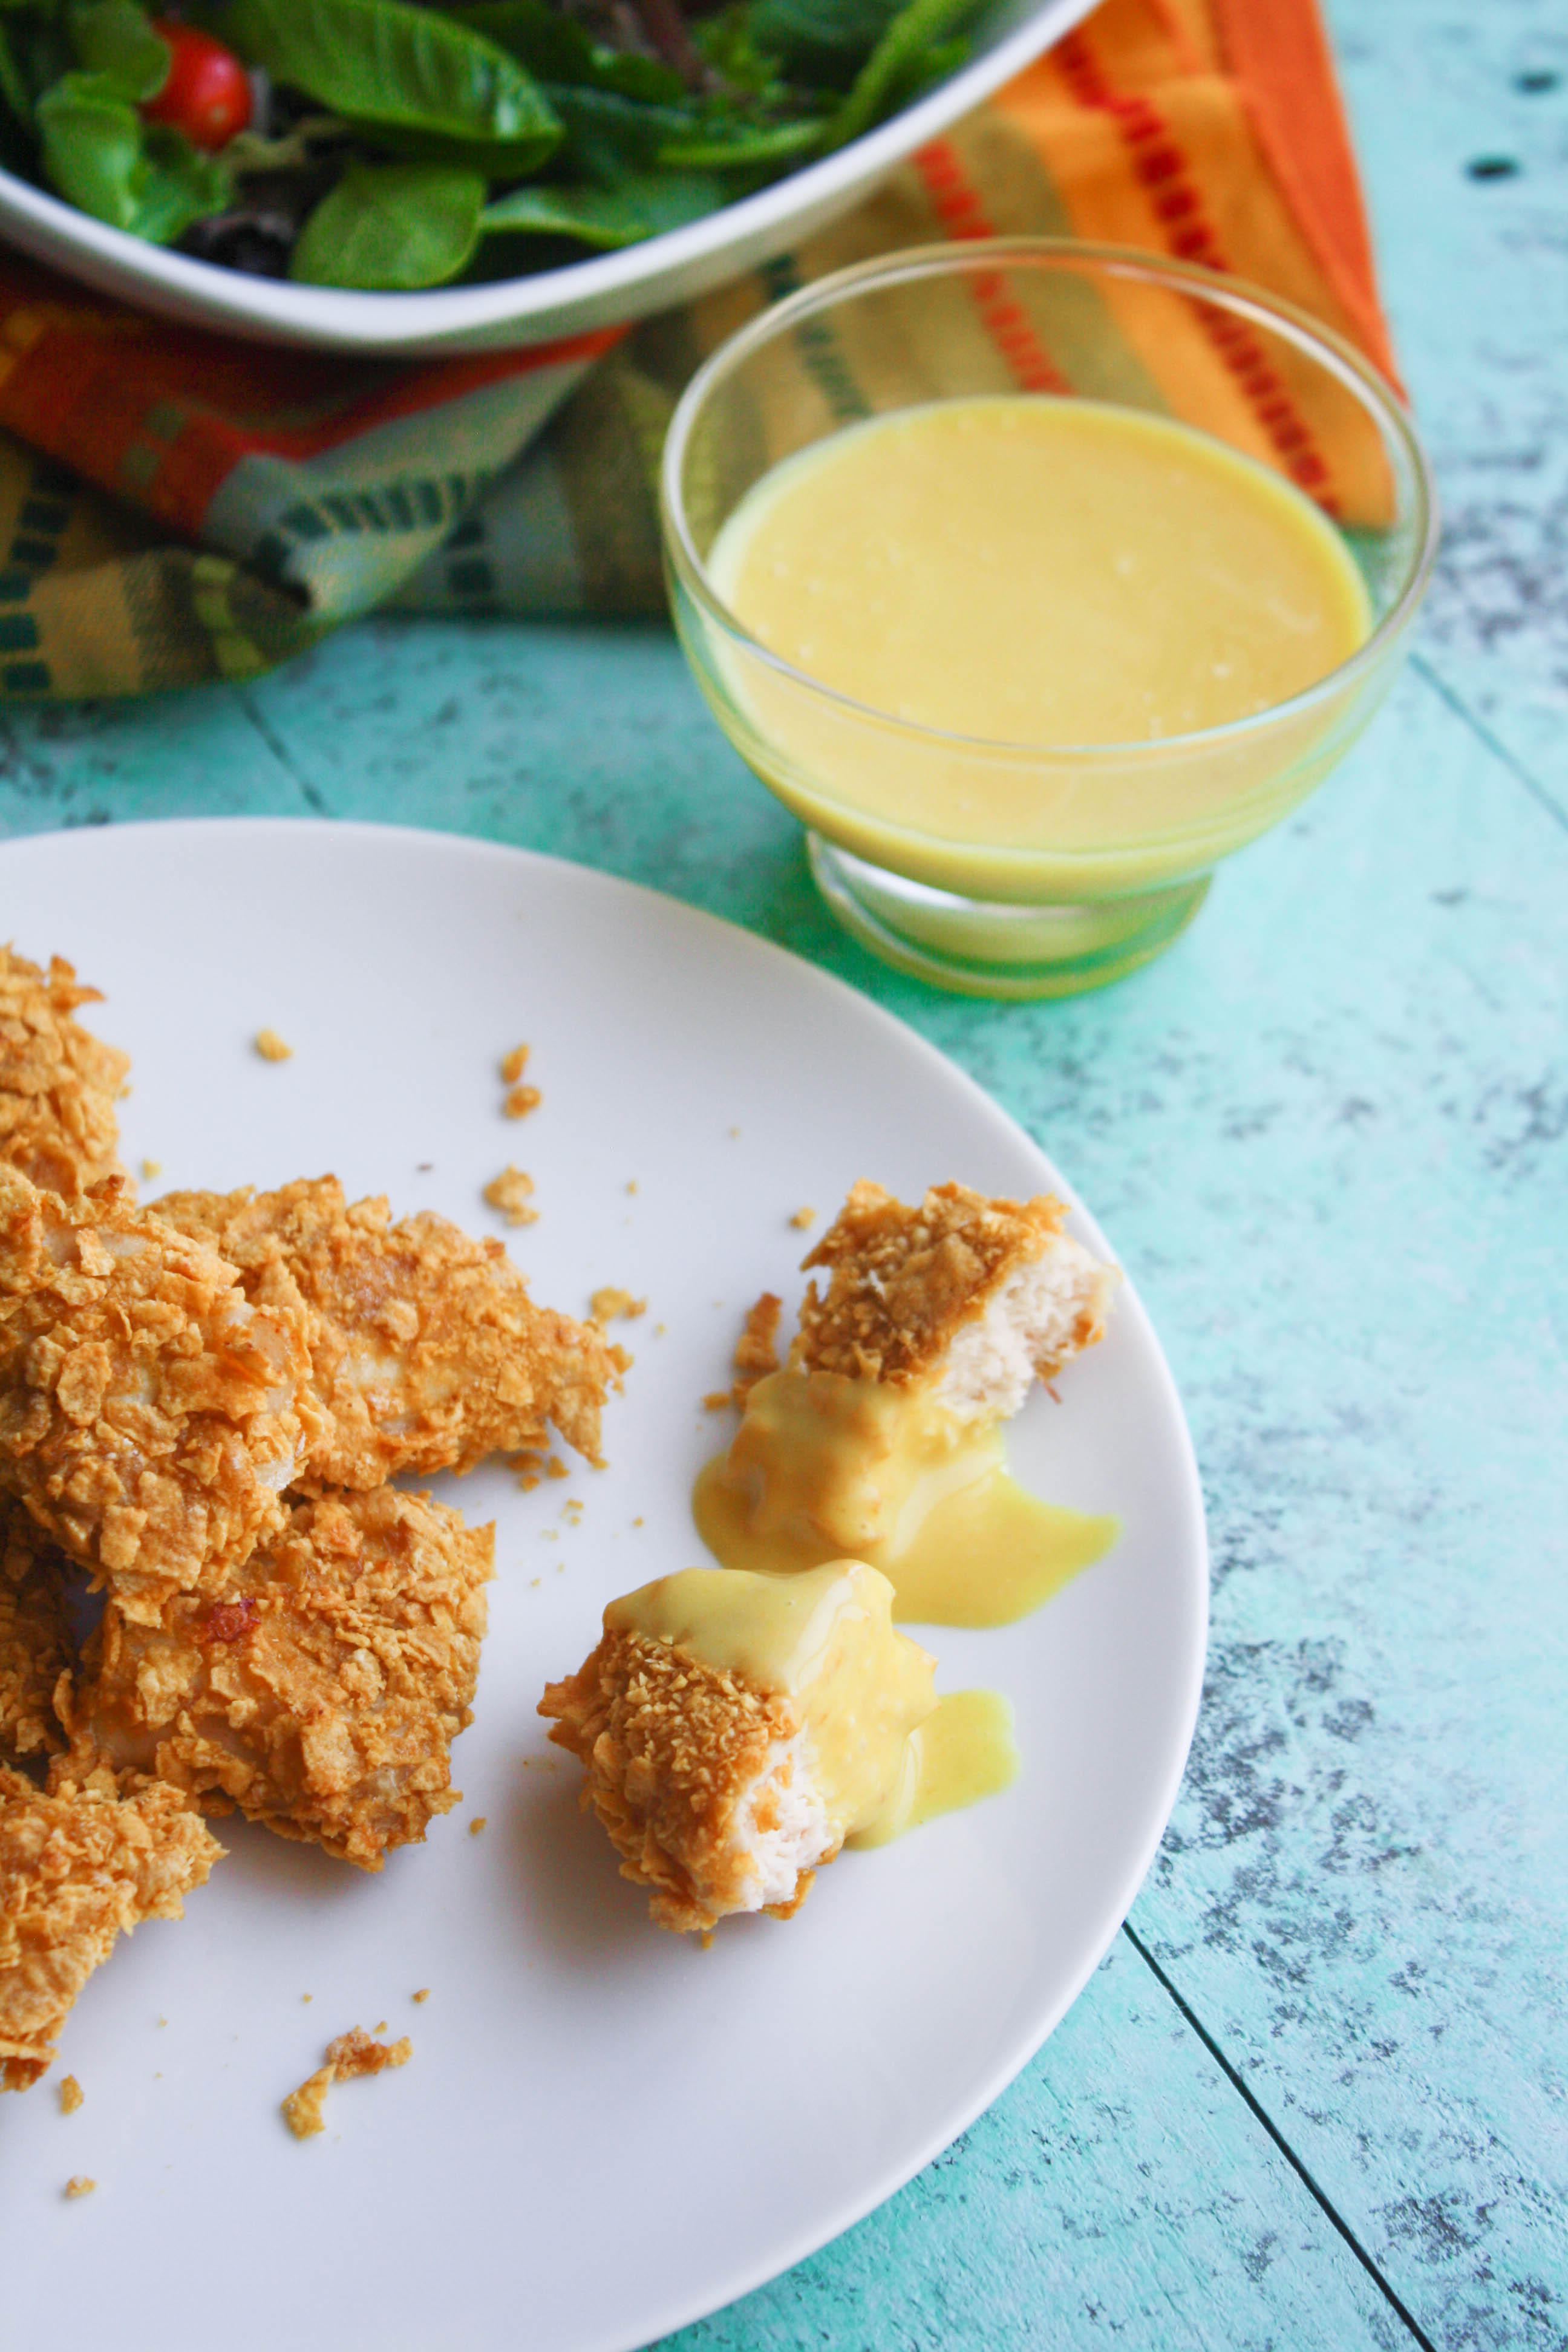 Crunchy Oven Baked Chicken Nuggets with Honey Mustard Sauce makes a great meal. No boring chicken here!